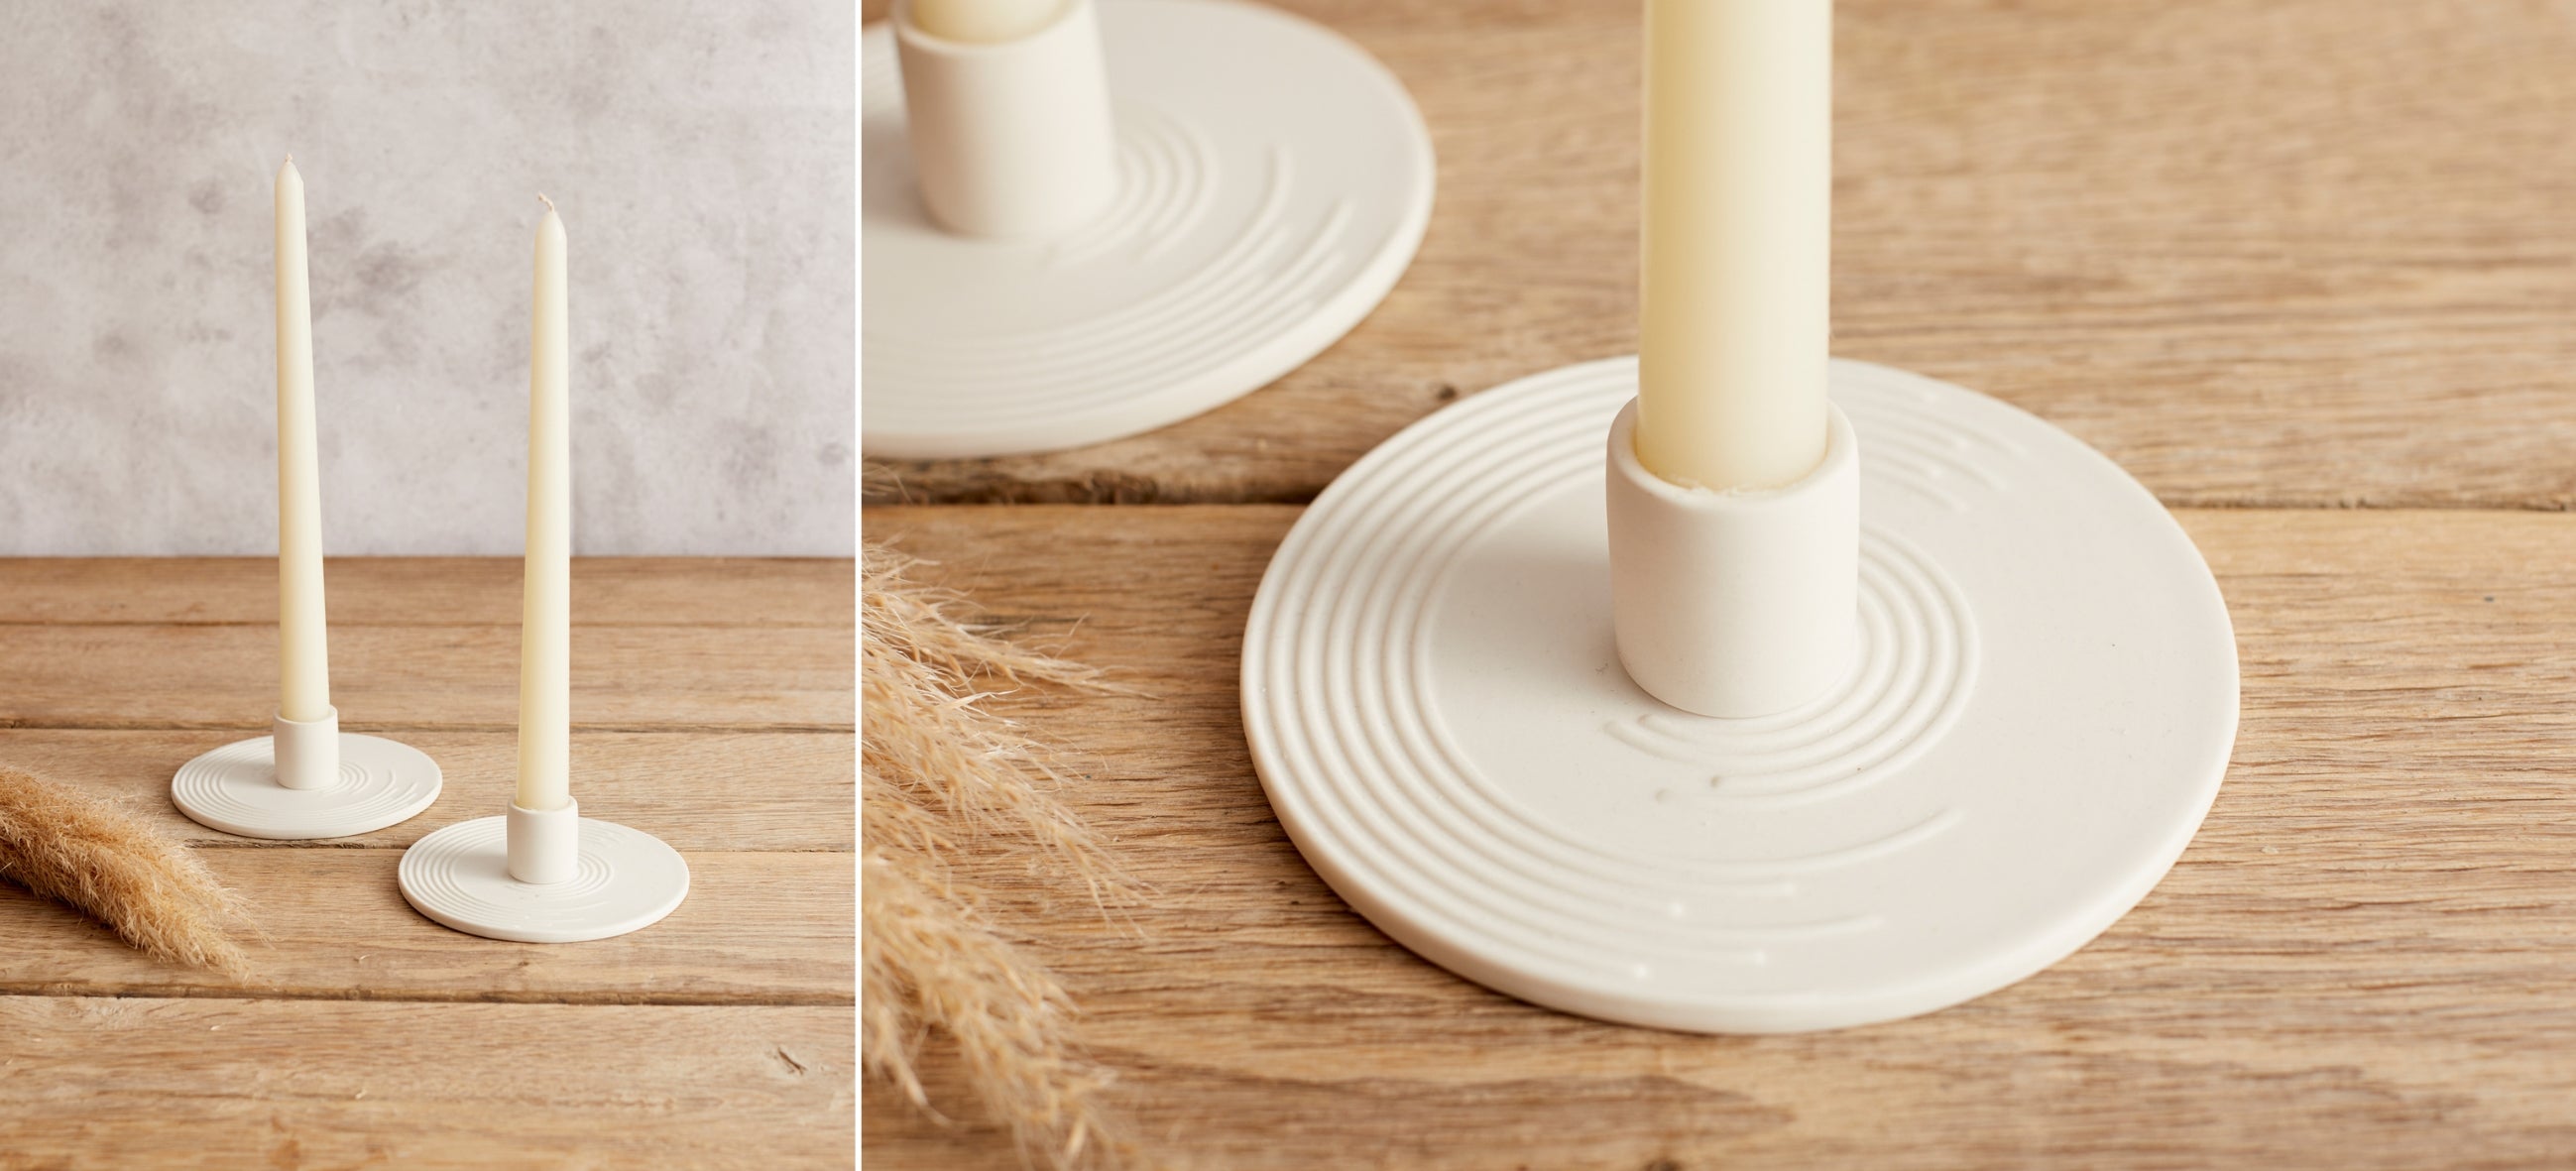 What a Host Home: White Ceramic Candle Holders